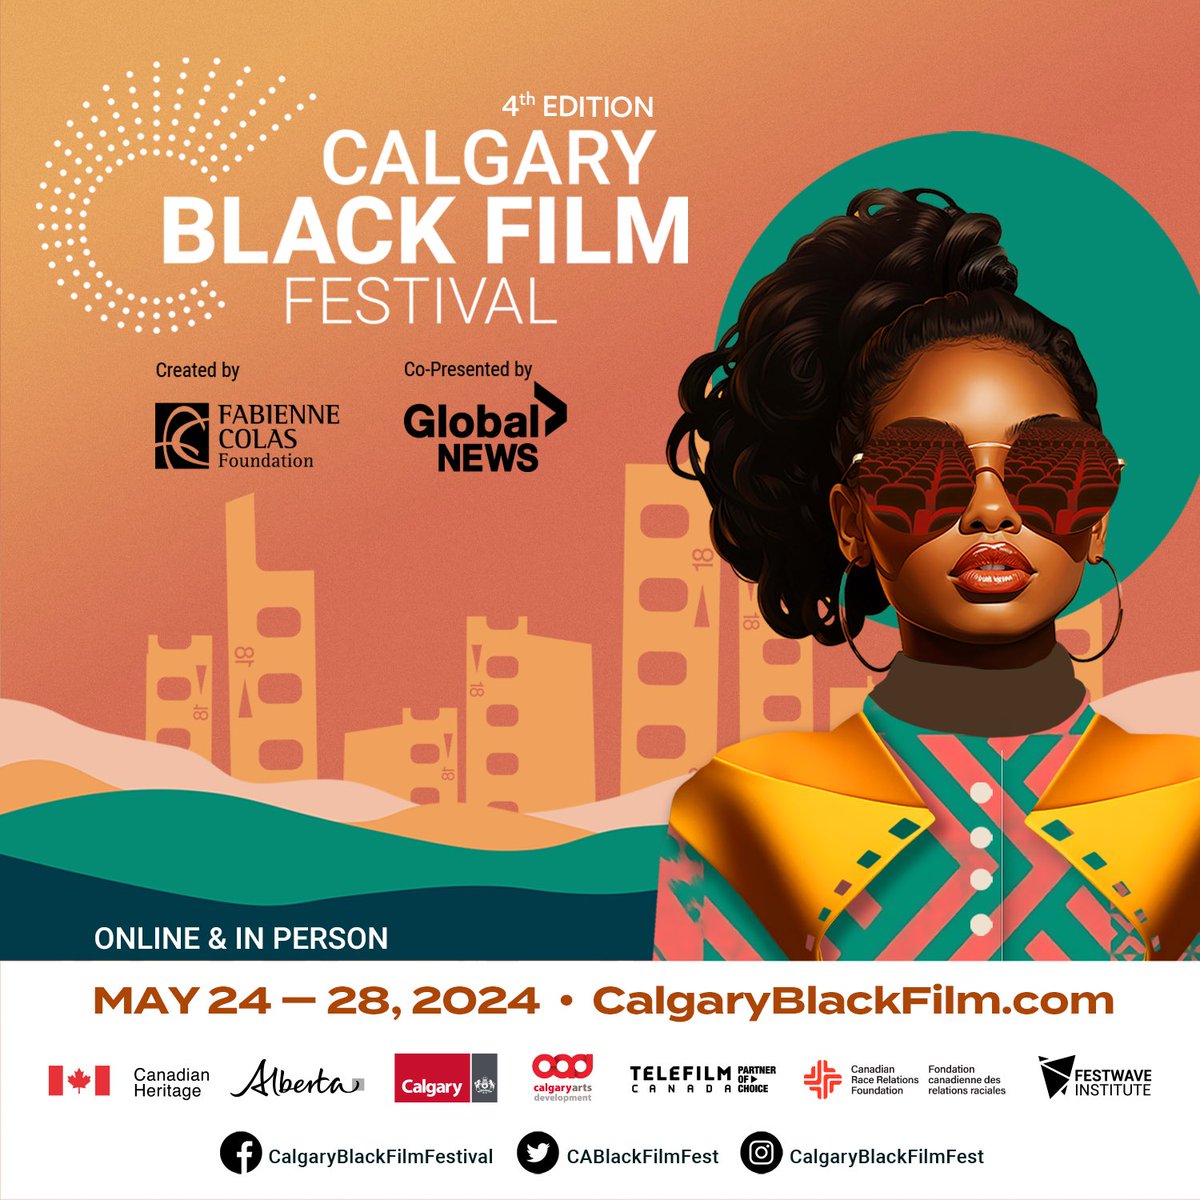 The 4th Calgary Black Film Festival is back in person and online from May 24 – 28, 2024! Experience 35 films, panels, and workshops at The Globe Cinema and Calgary Memorial Park Library. All films will be accessible on May 24. Get your tickets here: calgaryblackfilm.com/tickets-and-pa…